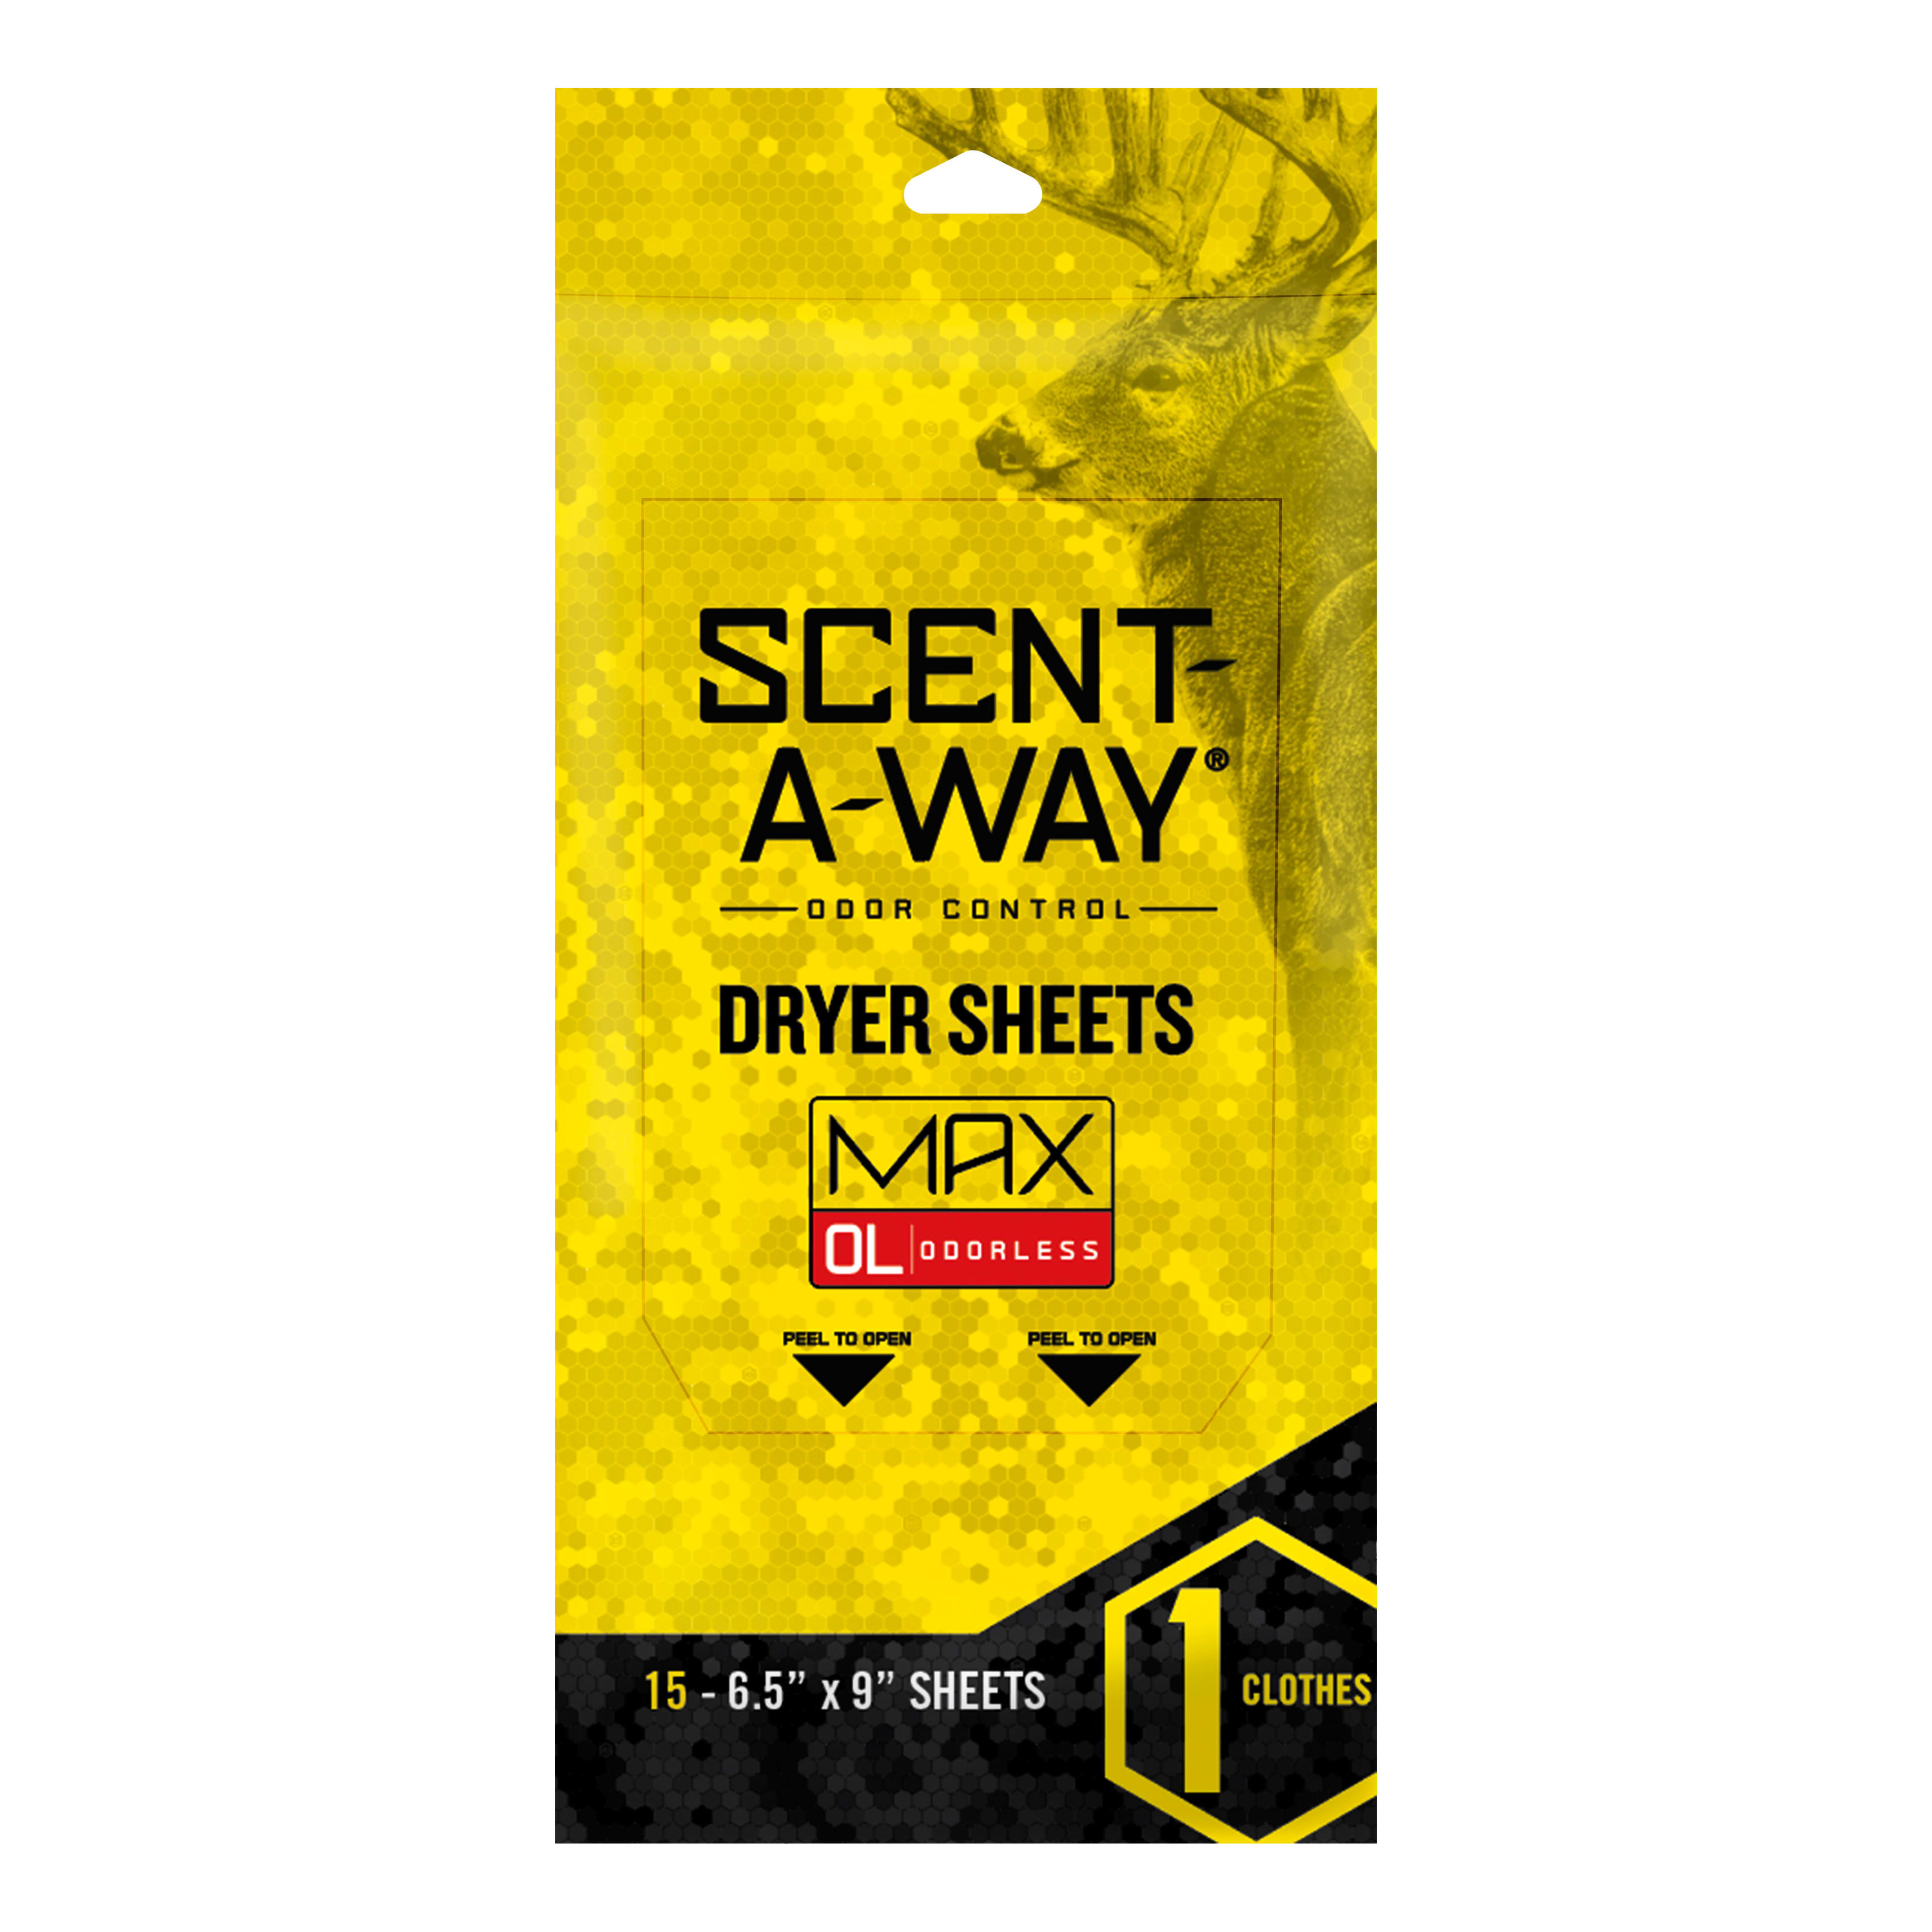 Scent-A-Way® MAX Odourless Dryer Sheets